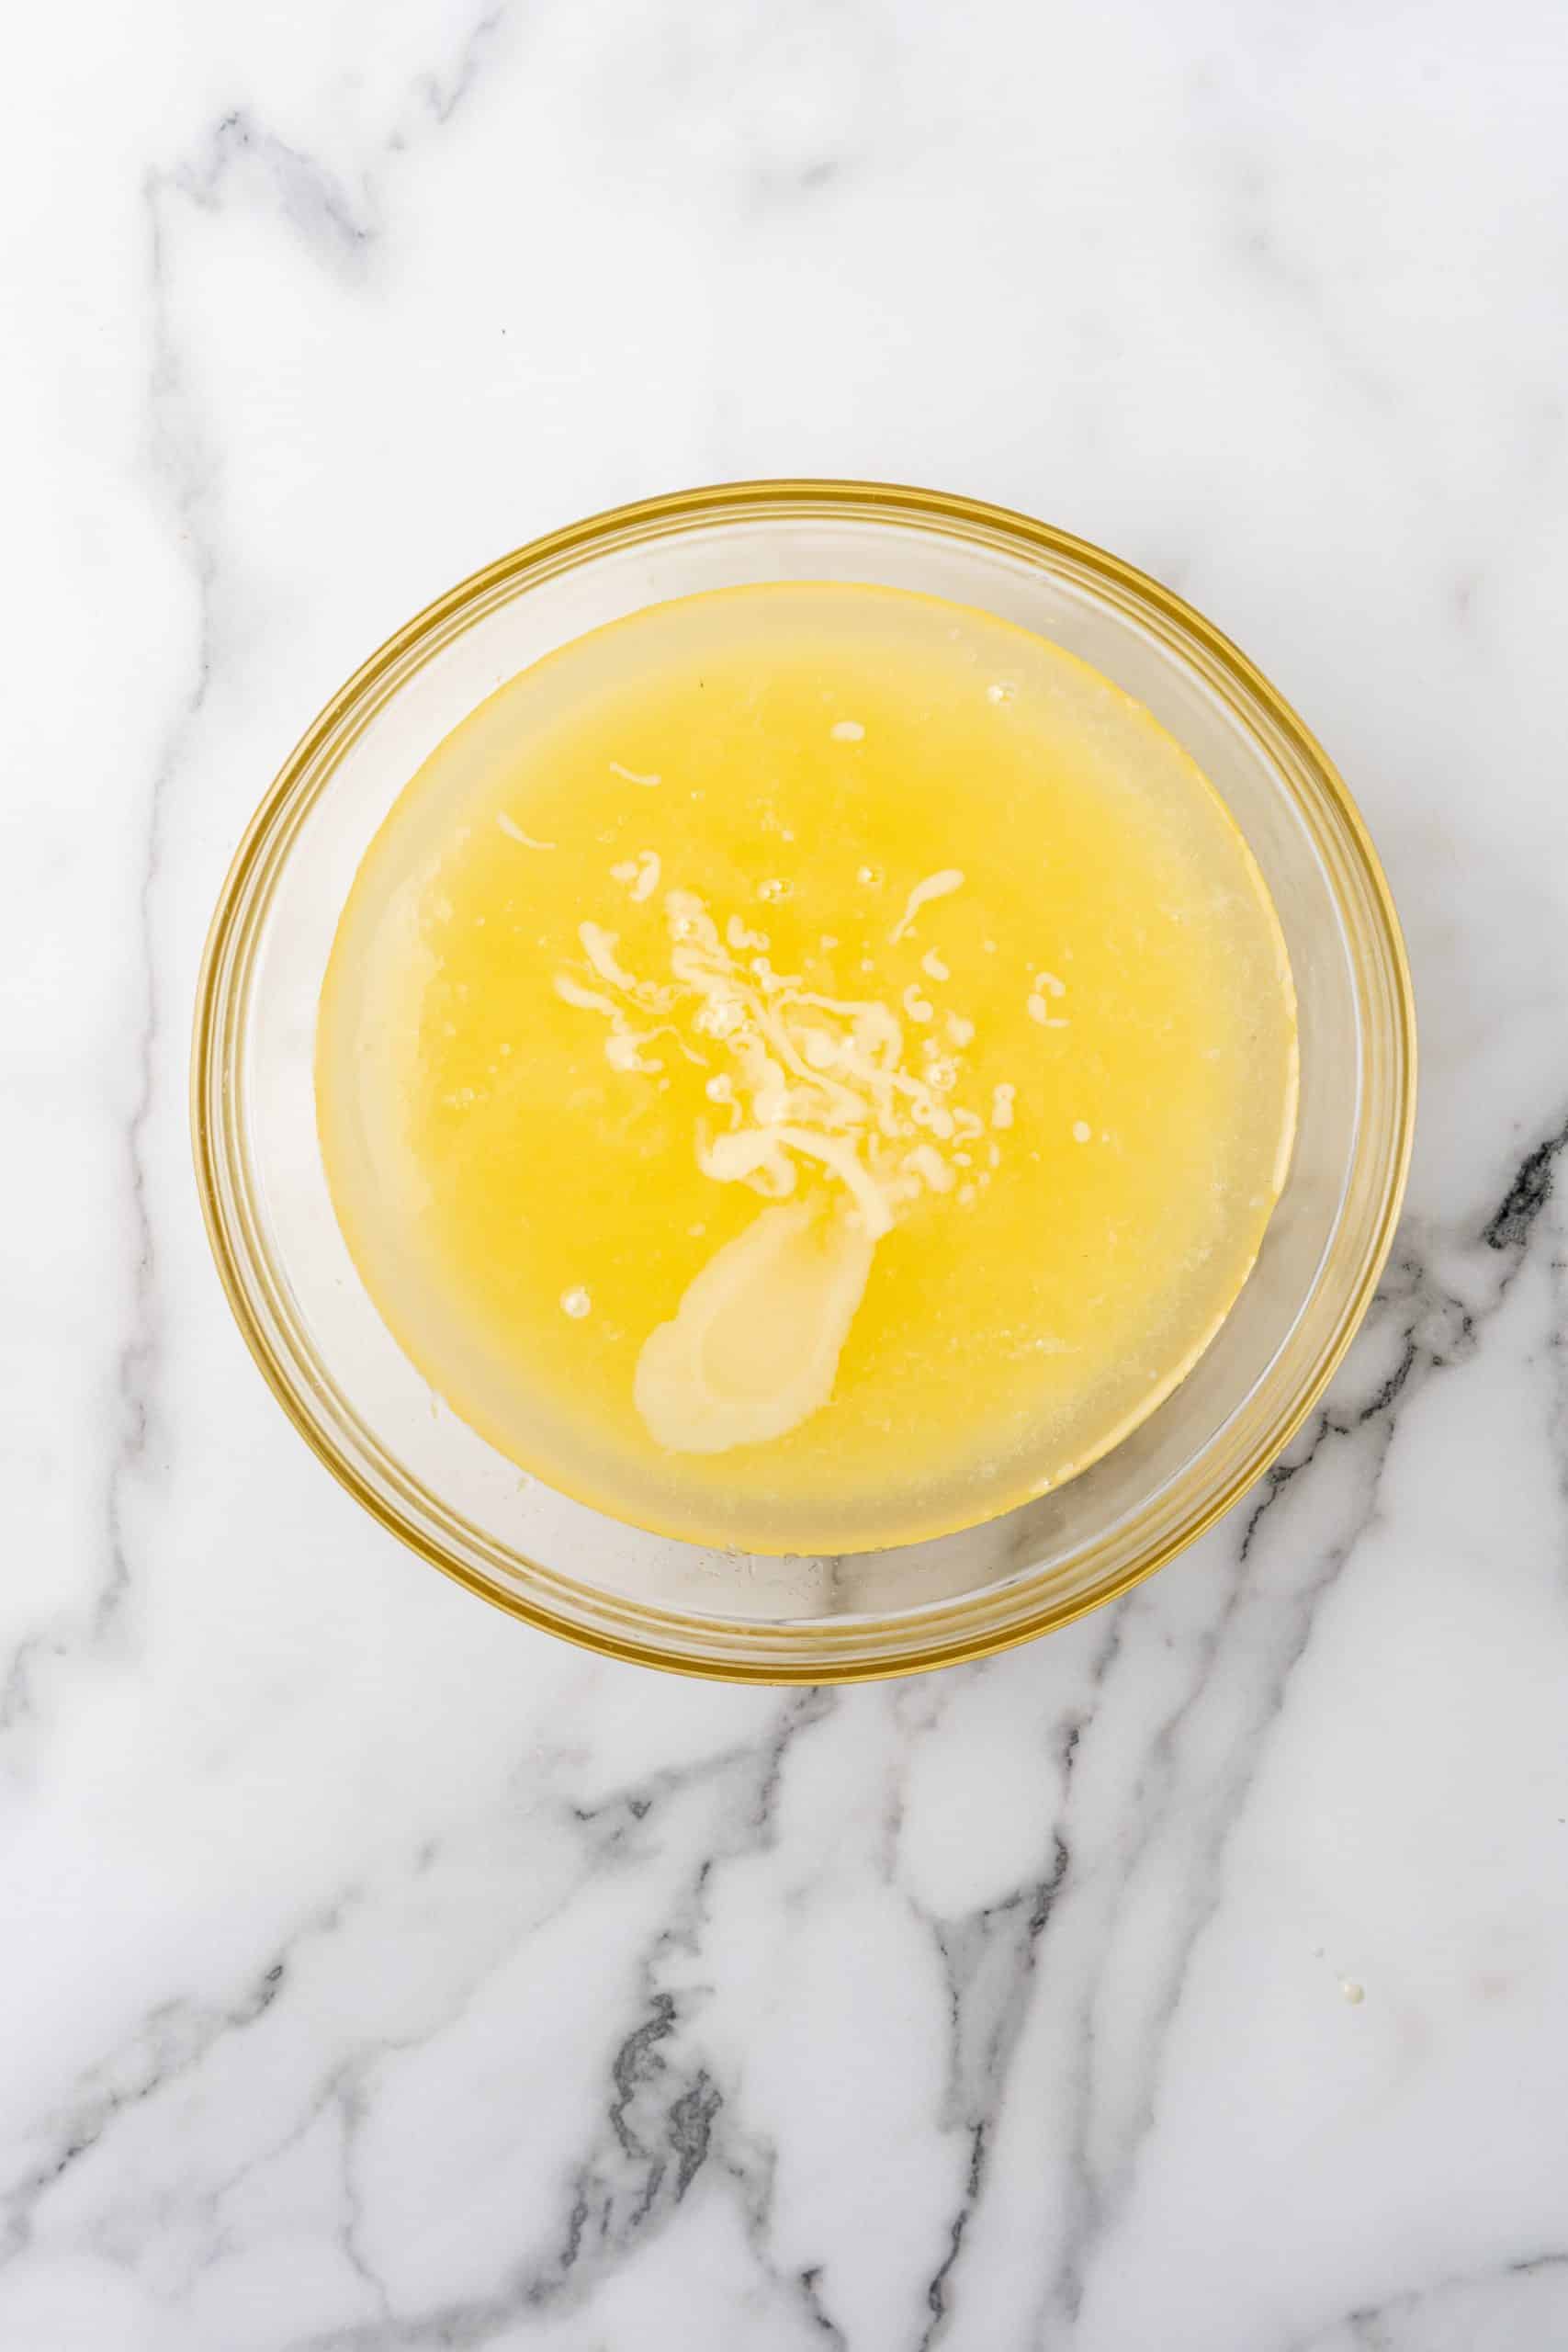 lemonade concentrate in a glass mixing bowl